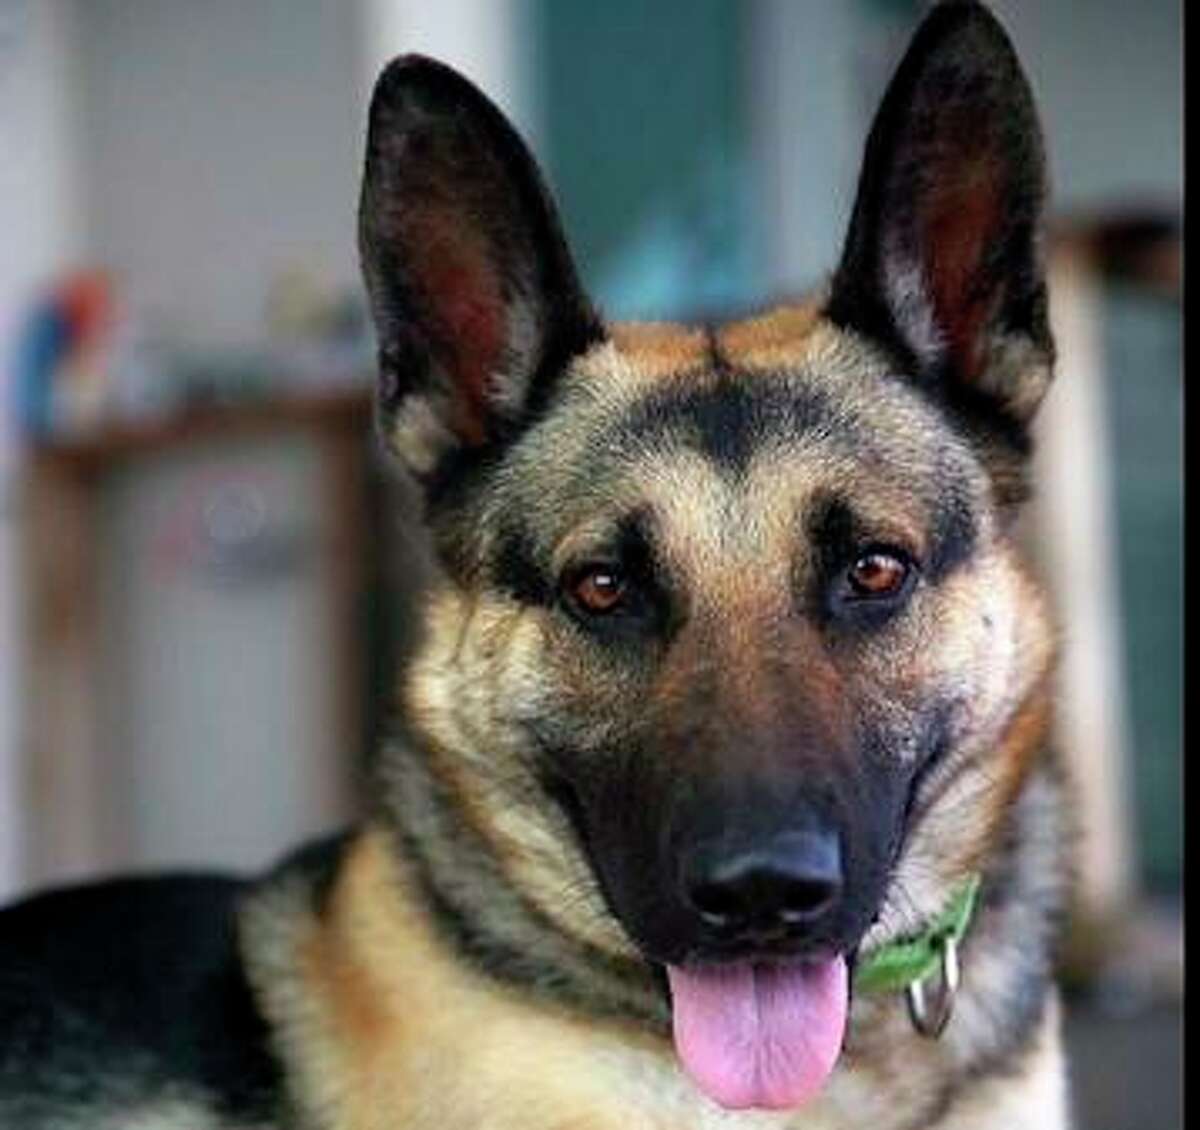 A photo of Summer, a 5-year-old German Shepherd reported stolen out of its owners hands in San Francisco.